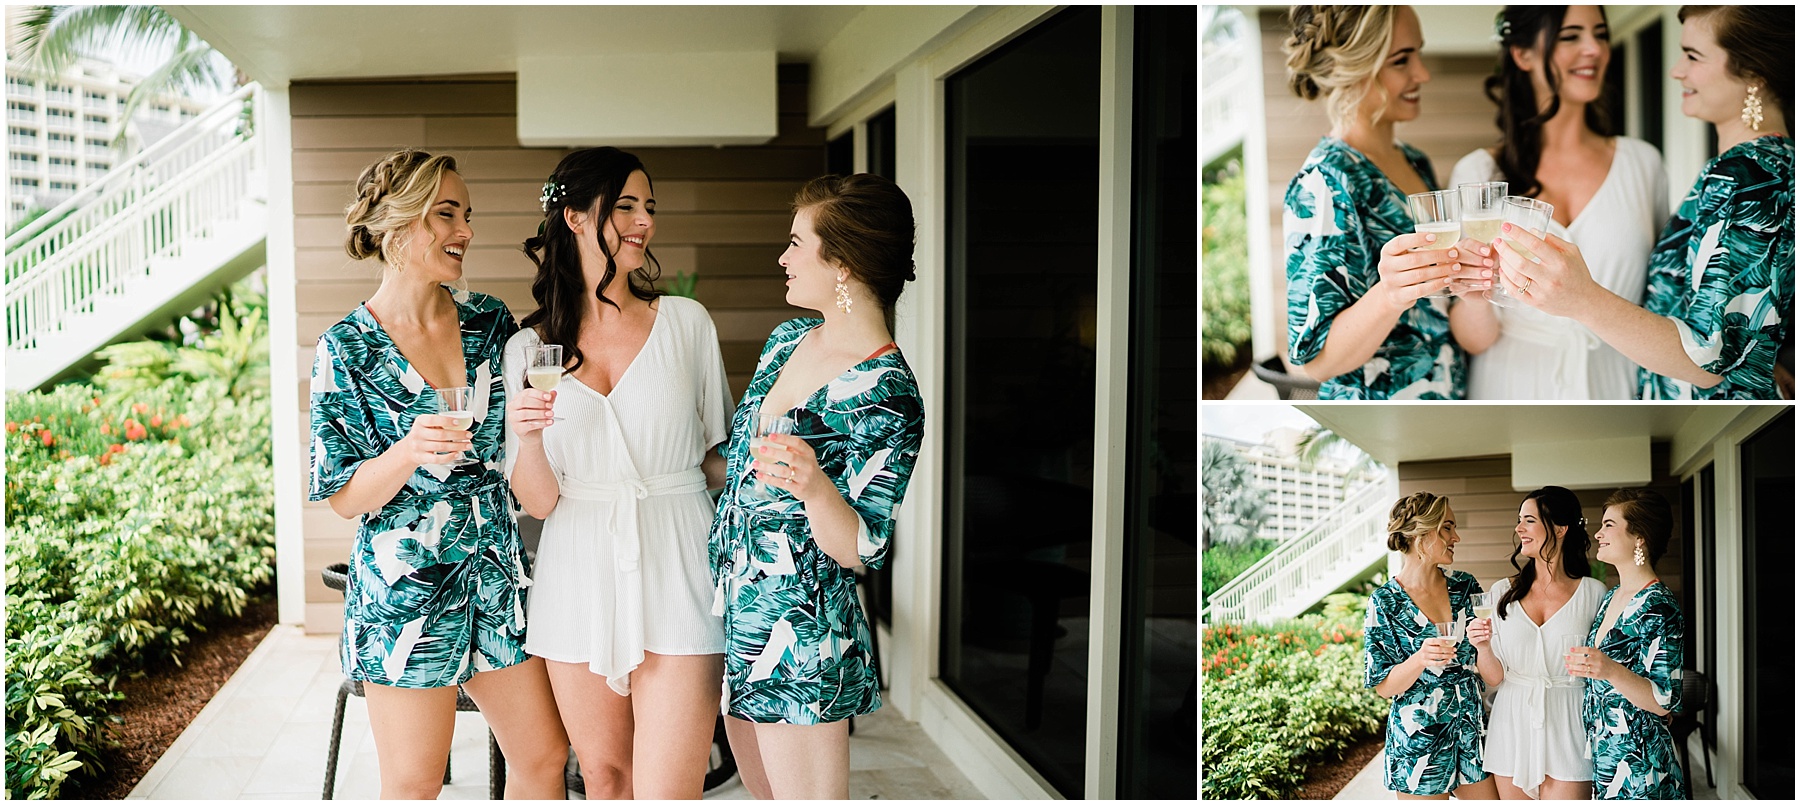 Bride and bridesmaids toast champagne on wedding day at JW Marriott Marco Island in Florida.